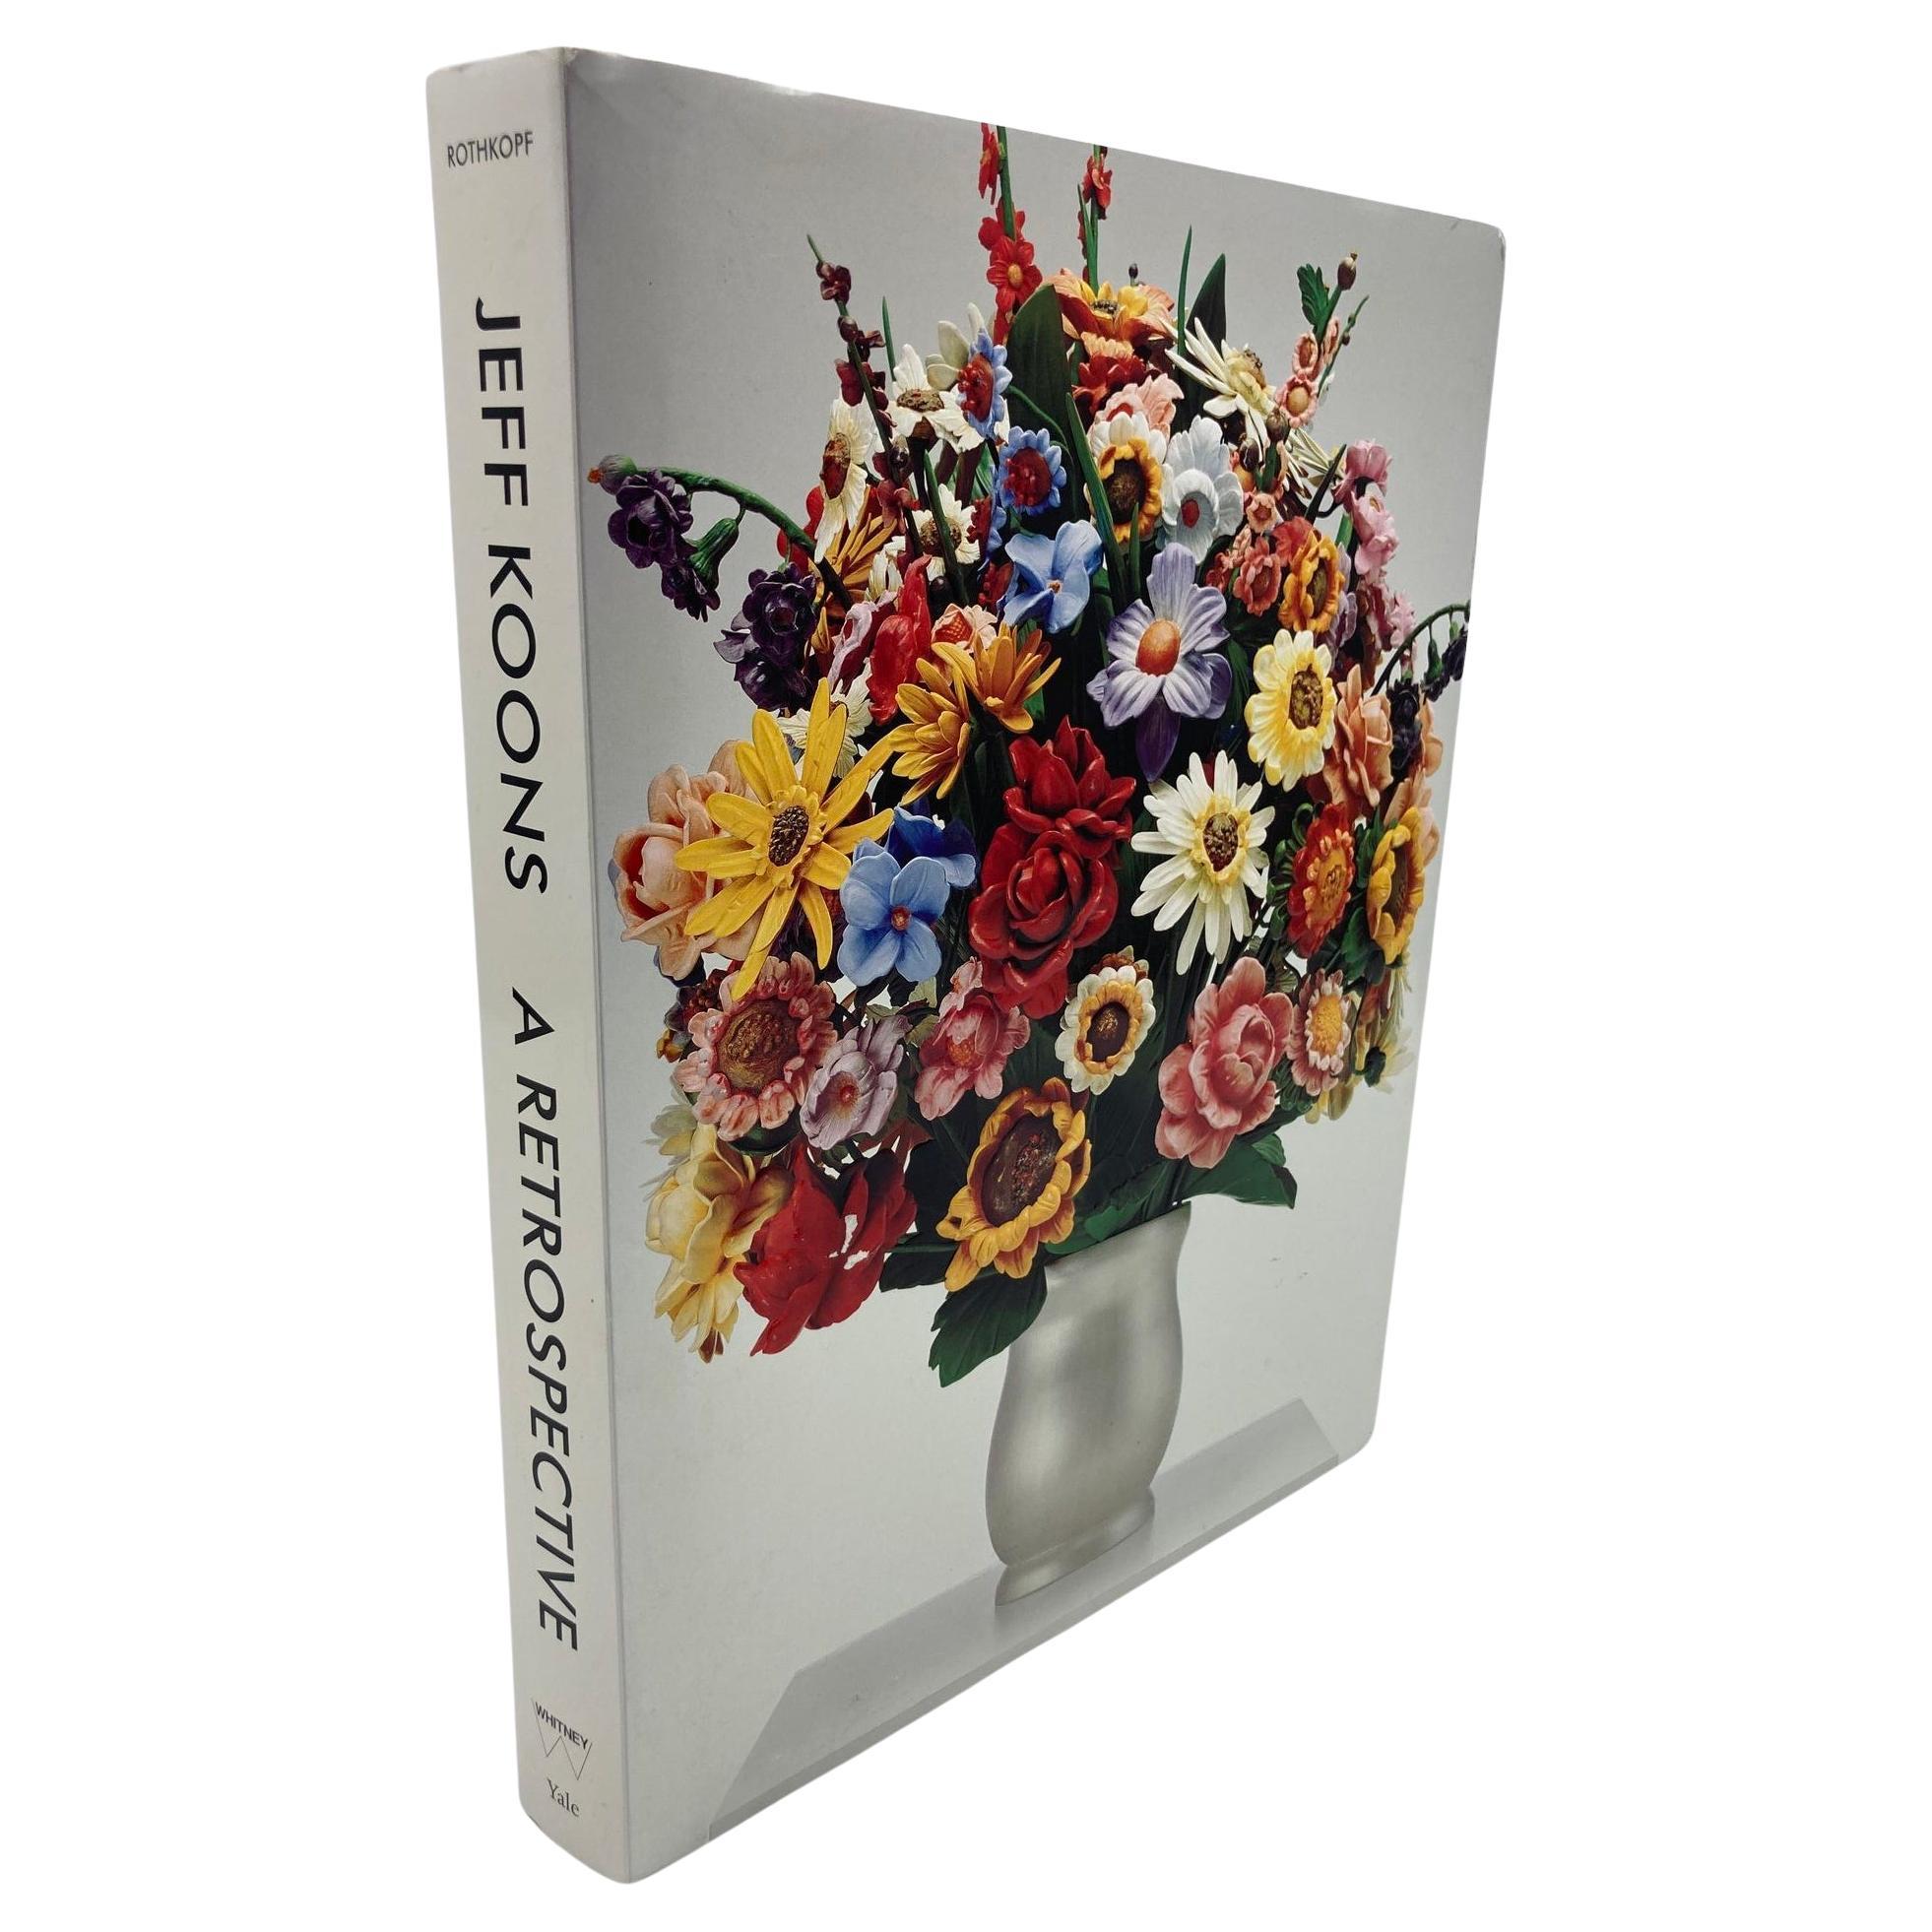 Jeff Koons : A Retrospective by Scott ROTHKOPF Hardcover Coffee Table Book For Sale